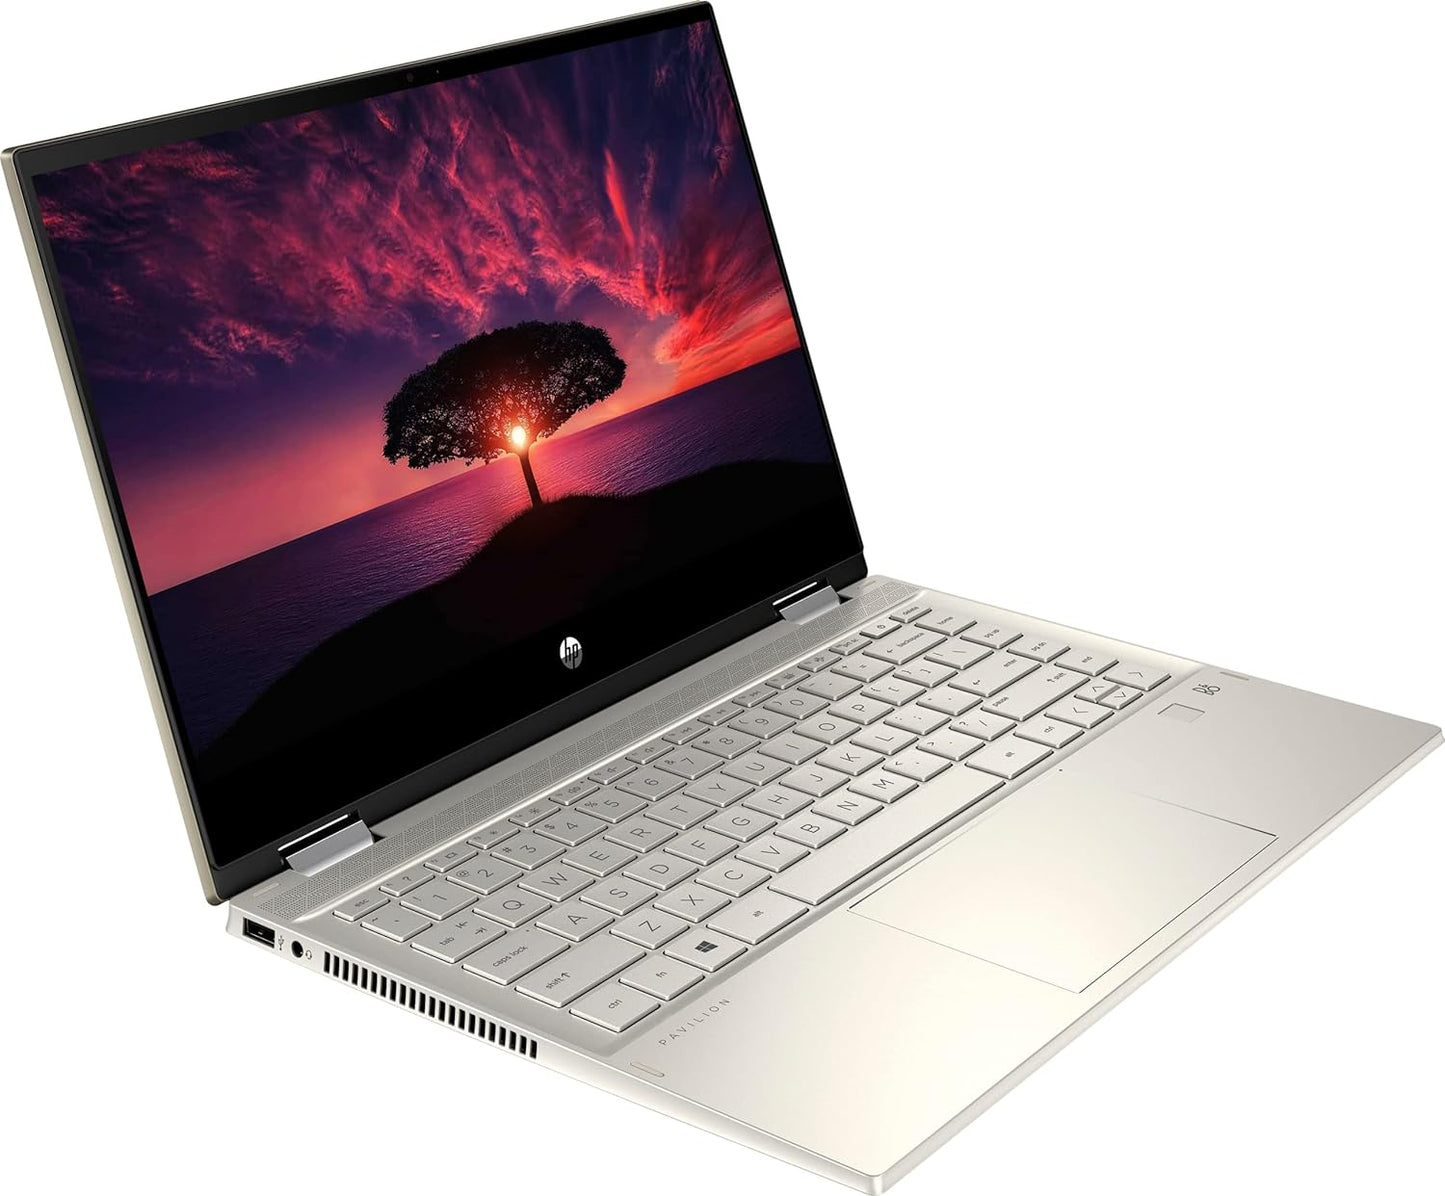 HP Pavilion x360 2 in 1 Convertible Business Laptop, 14 FHD Touchscreen, Core i5 1135G7 Up Warm Gold 14-14.99 inches